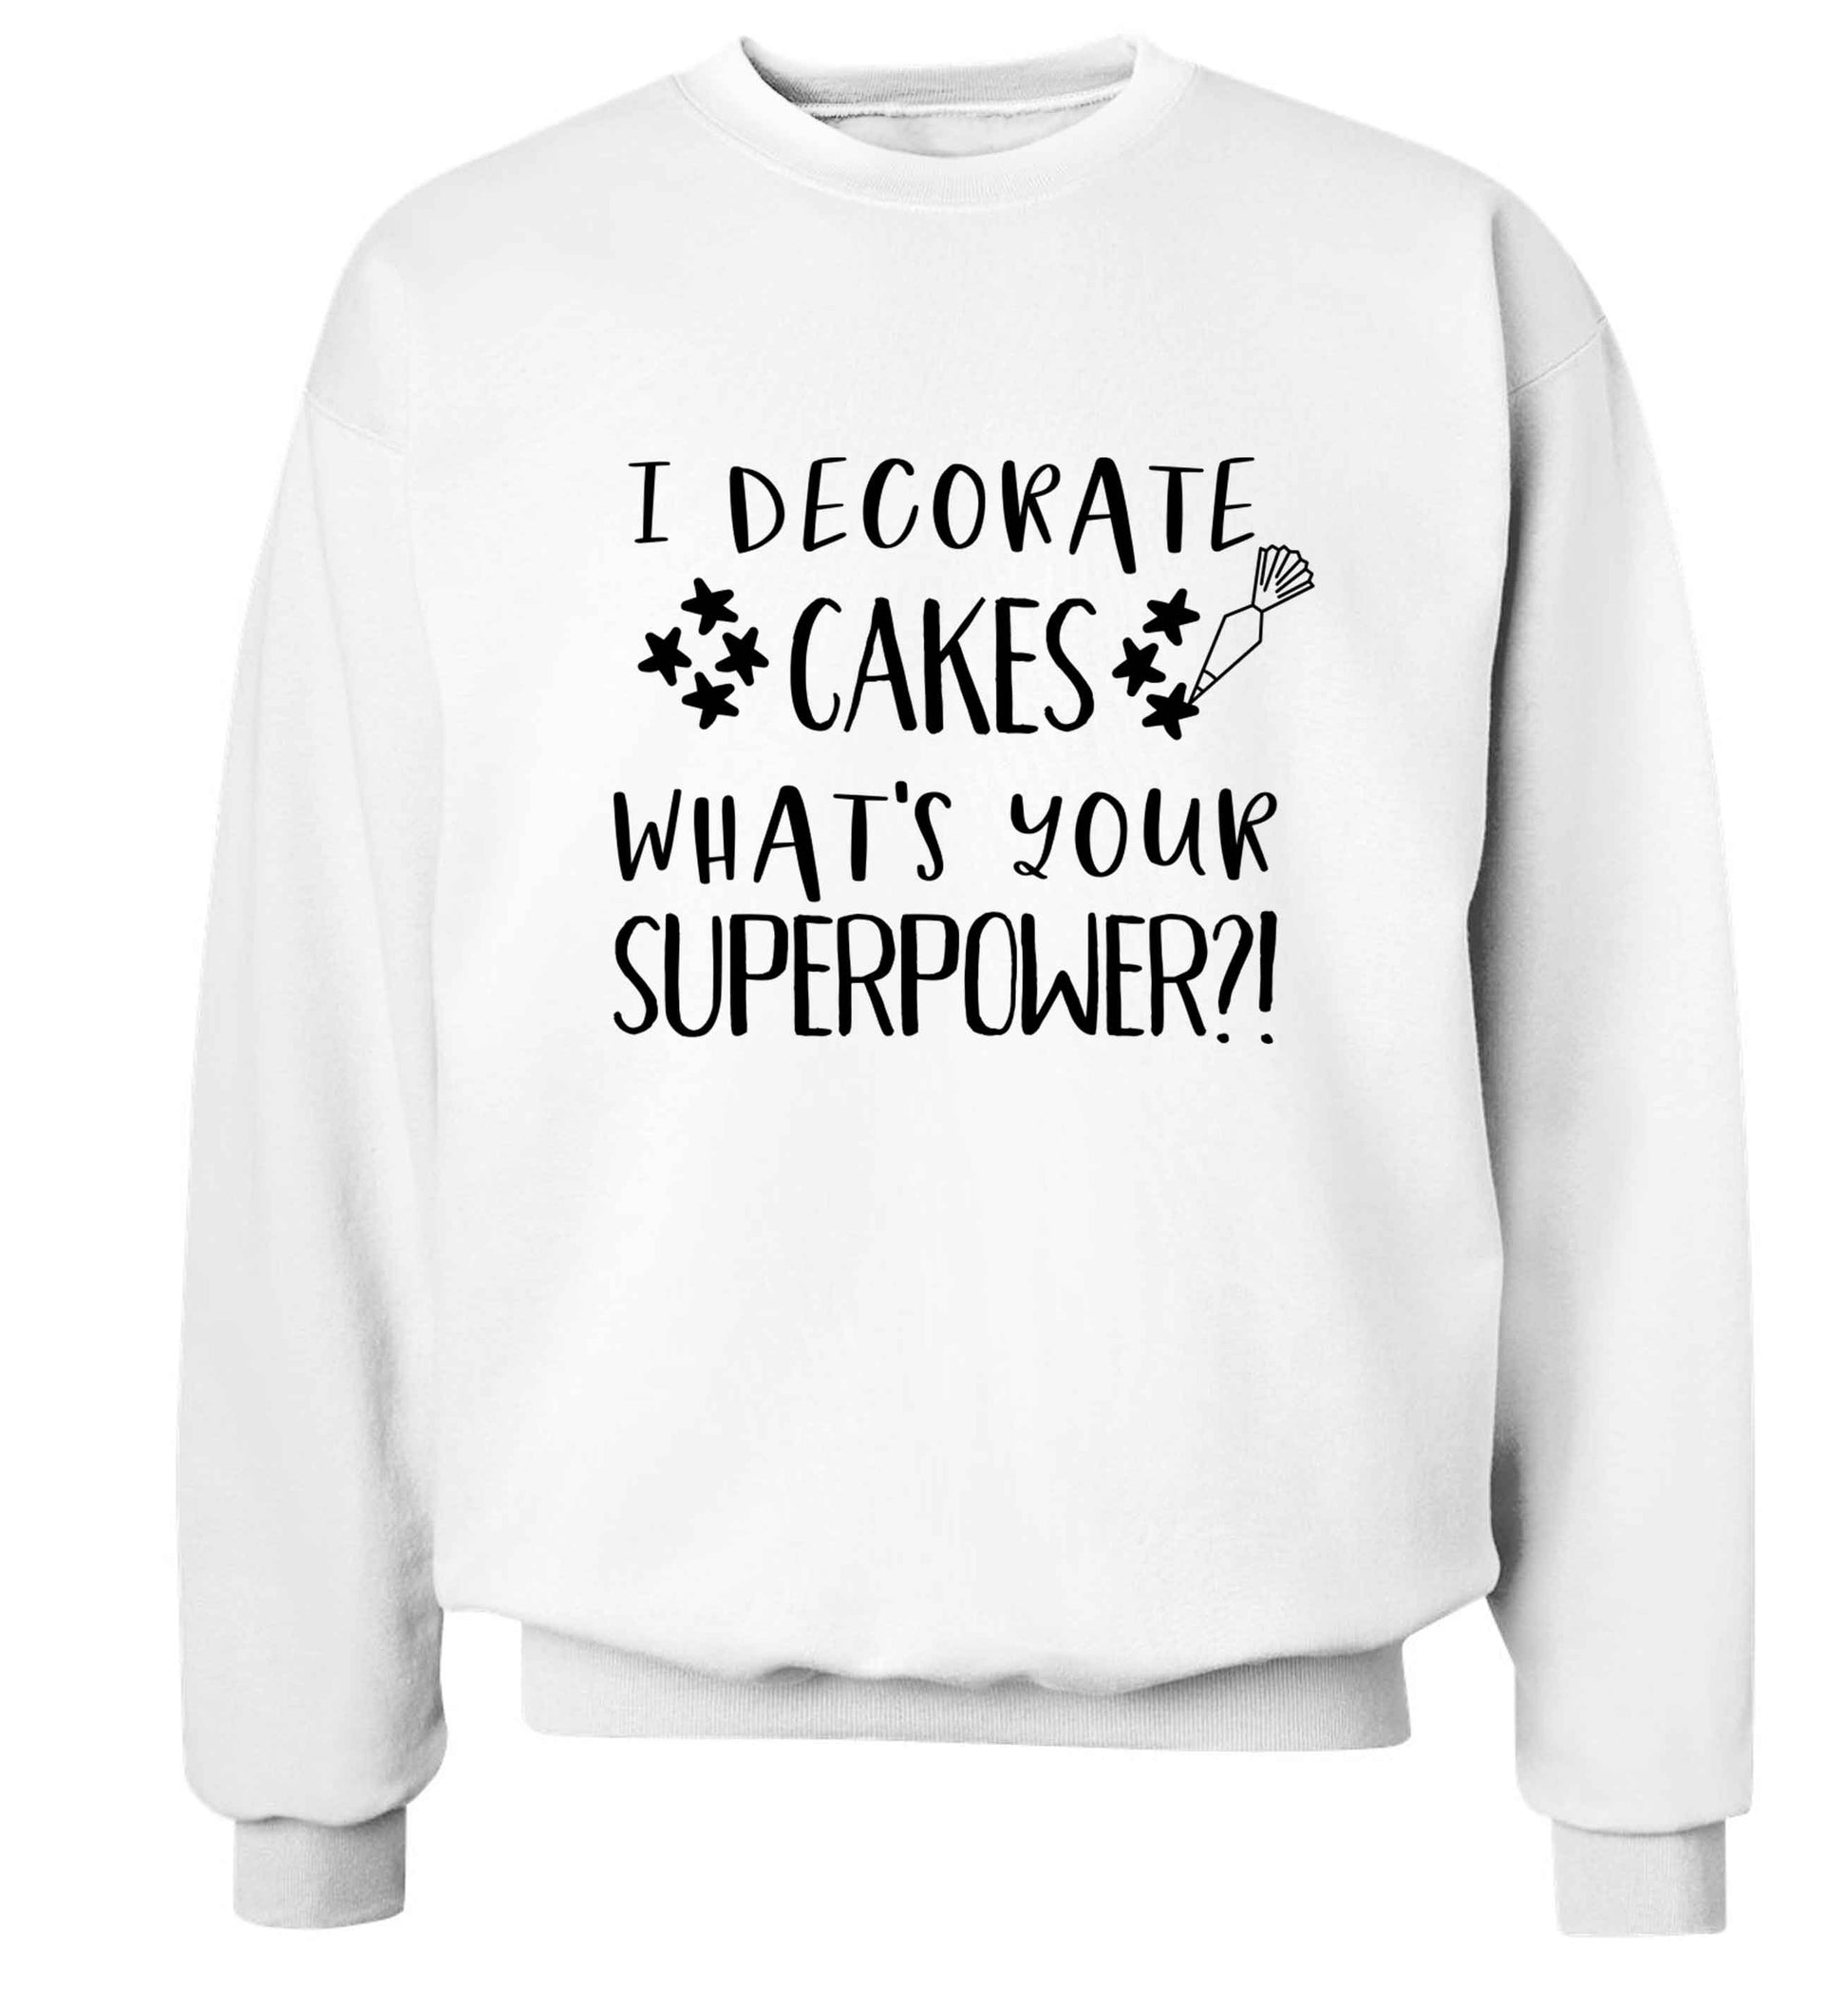 I decorate cakes what's your superpower?! Adult's unisex white Sweater 2XL